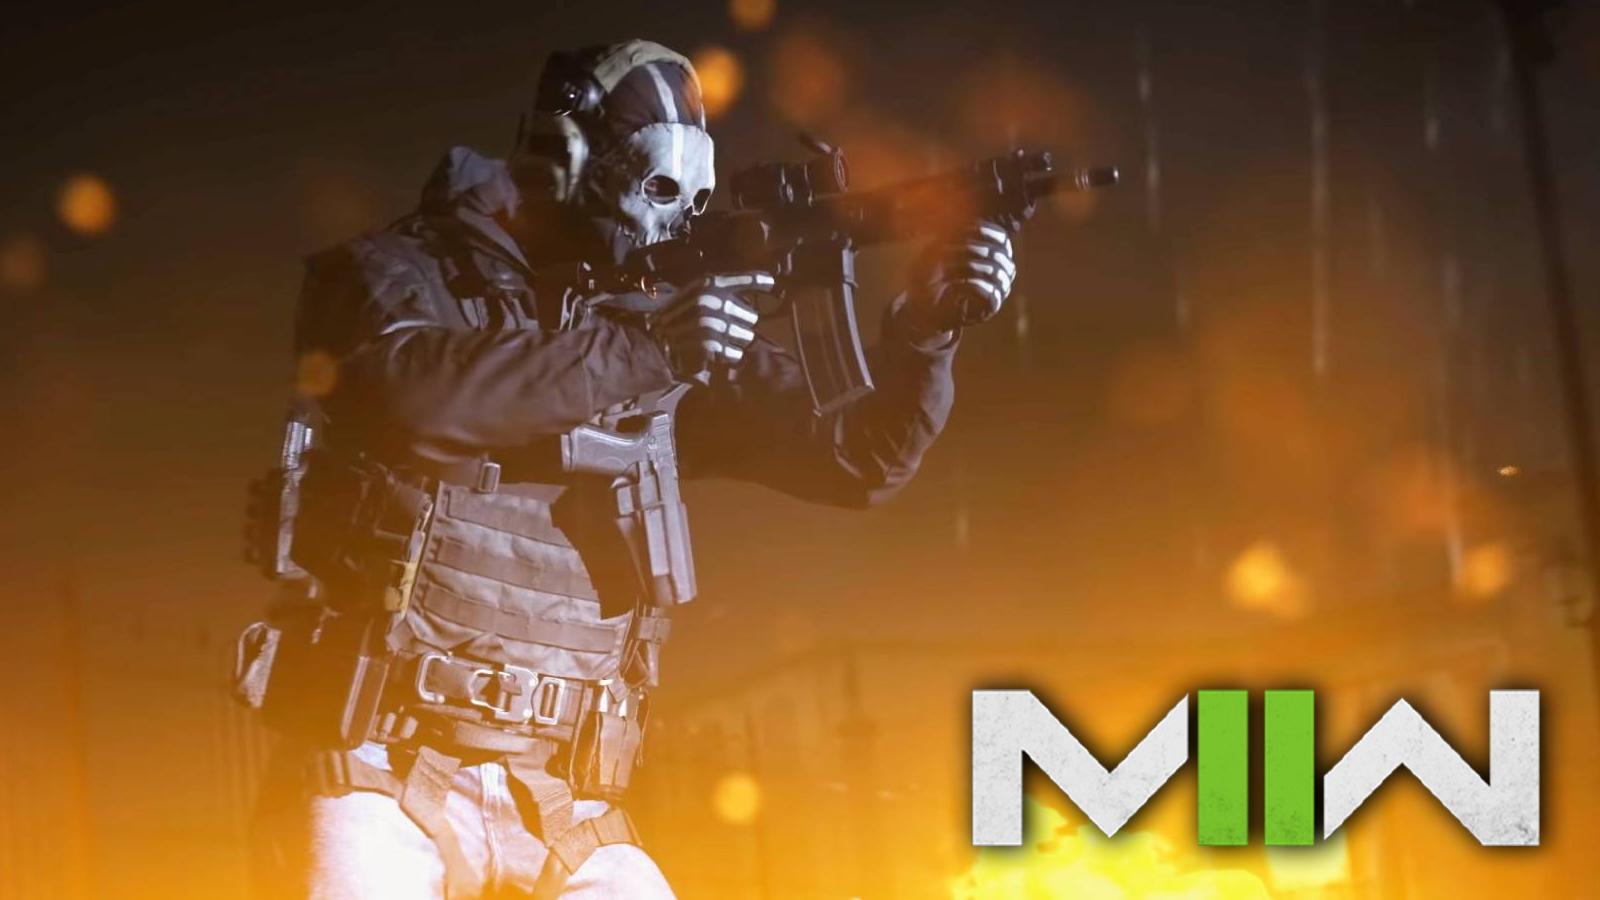 Modern Warfare 2 : Zombies Mobile Update  Fan made Call of duty Android 